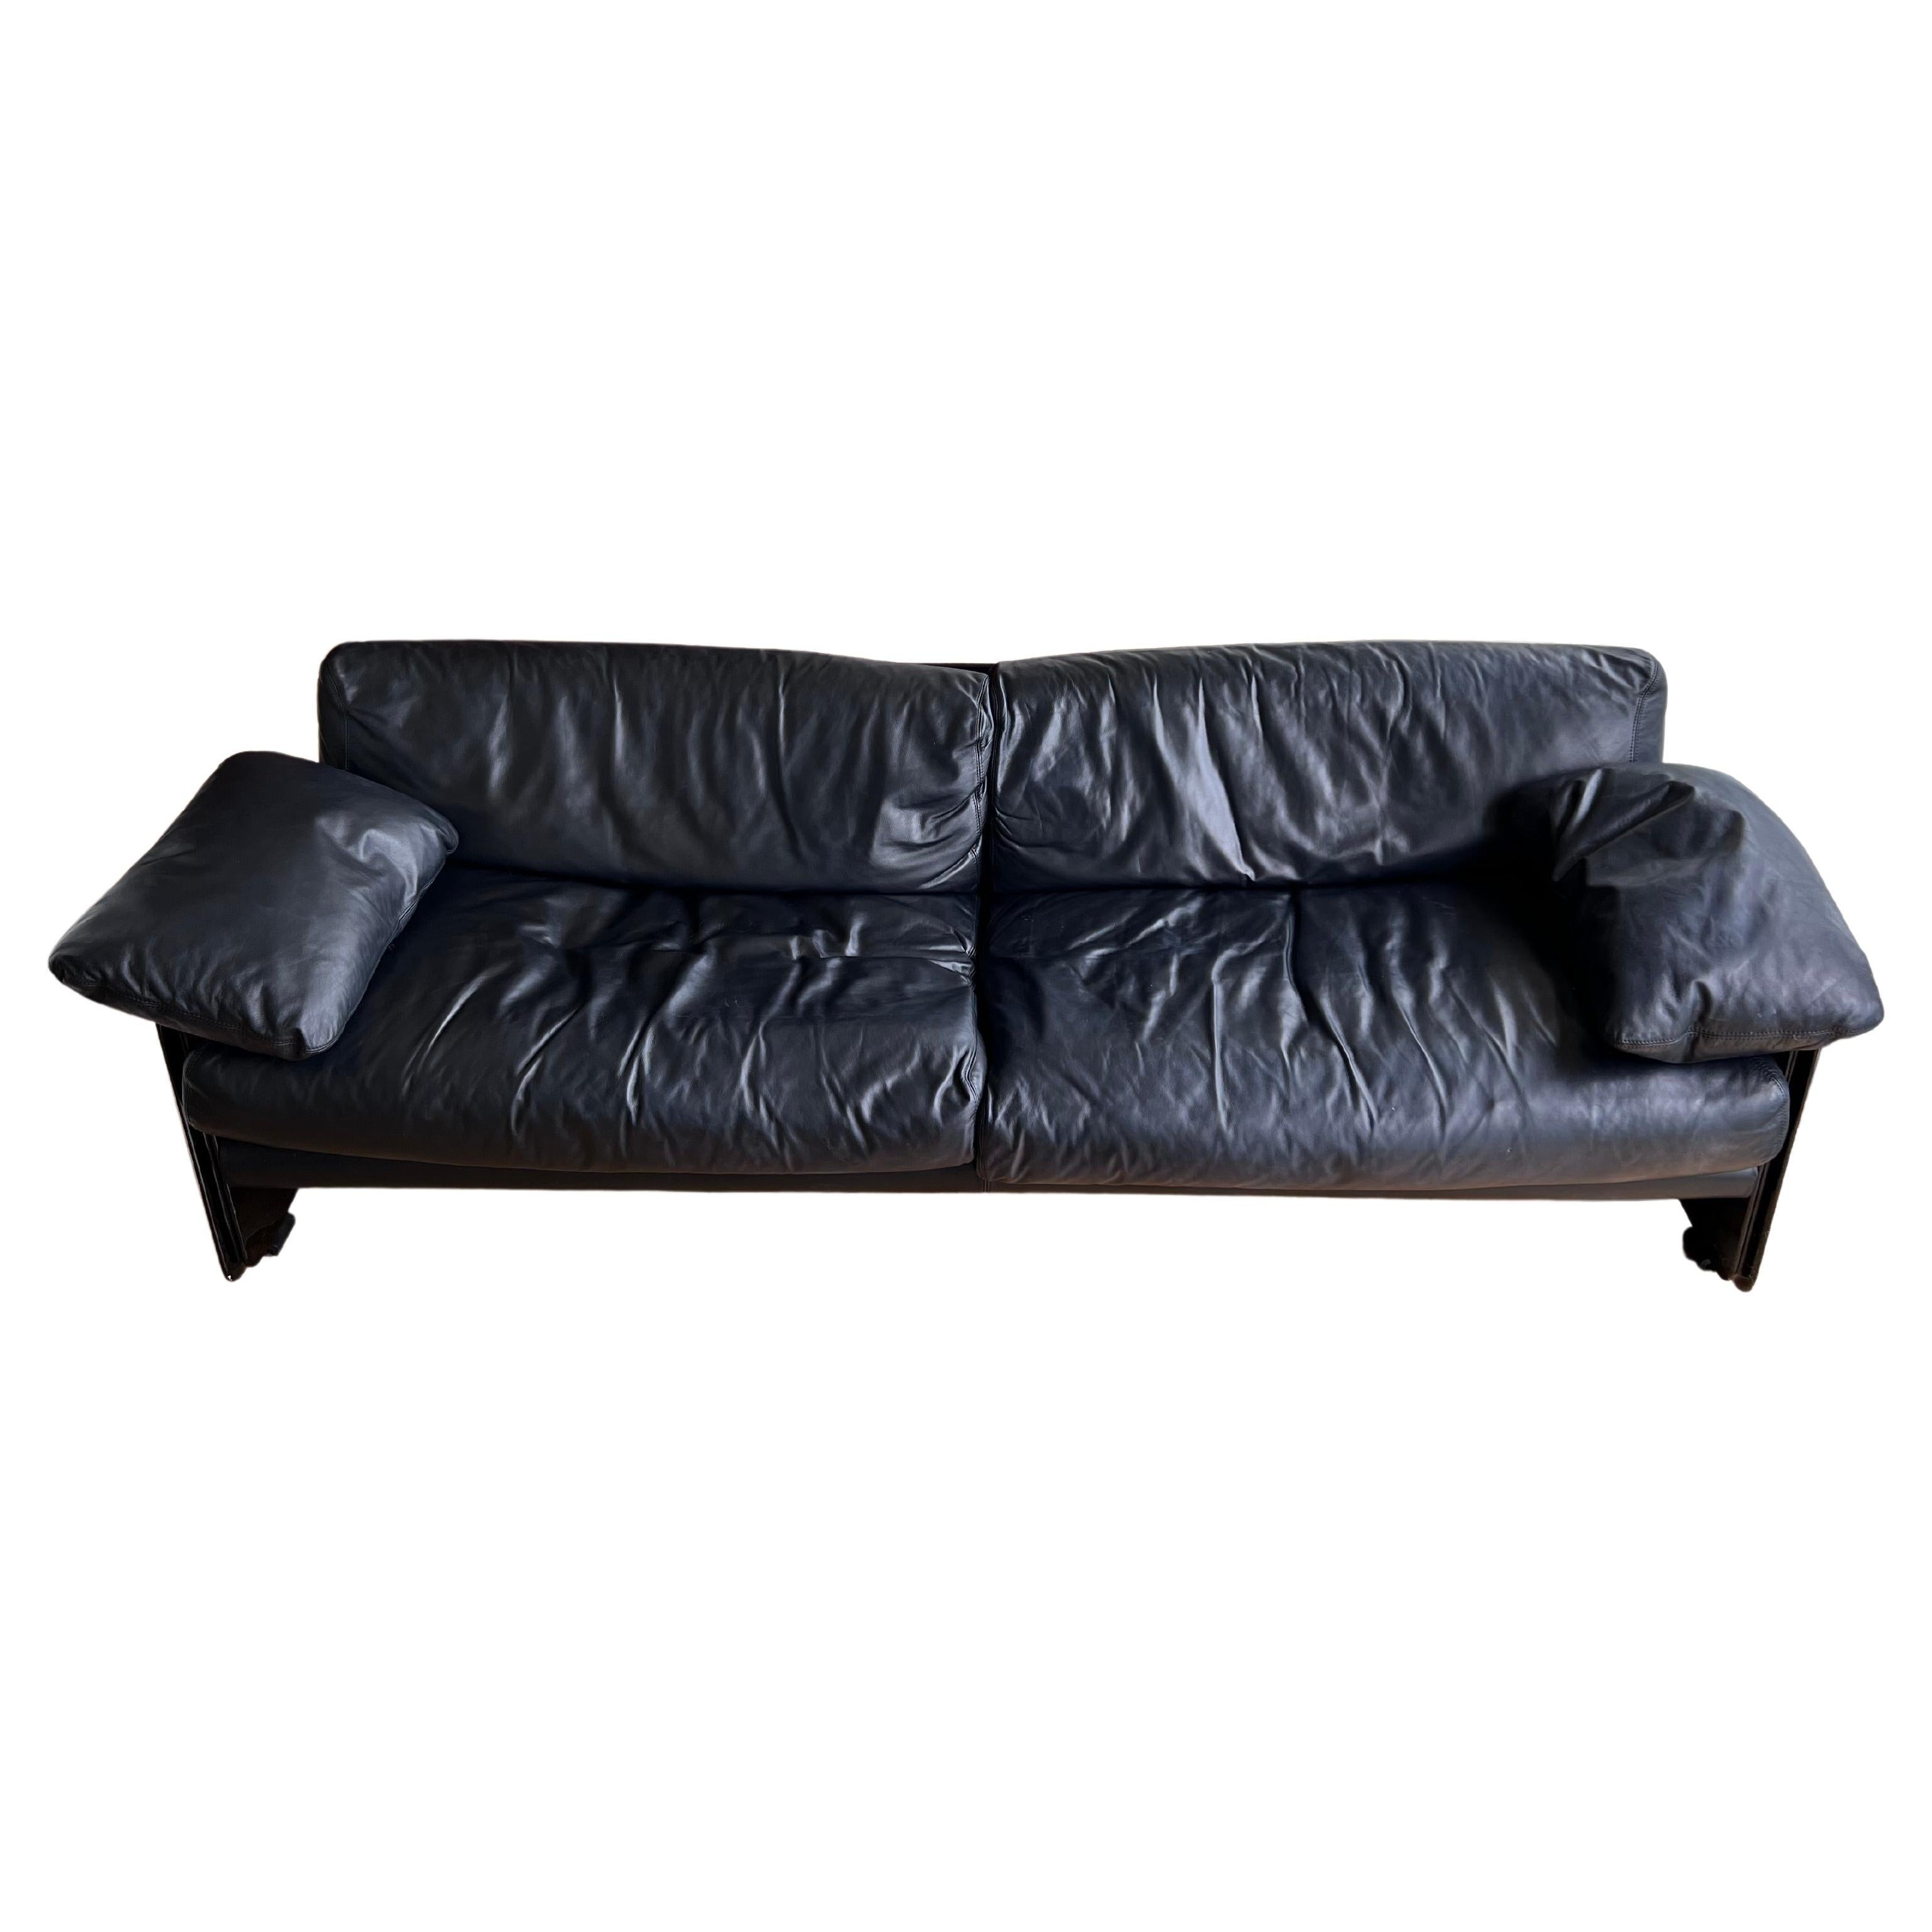 Vintage 1980s Italian Sofa in Black Leather and Lacquer Wood, Space Age Style For Sale